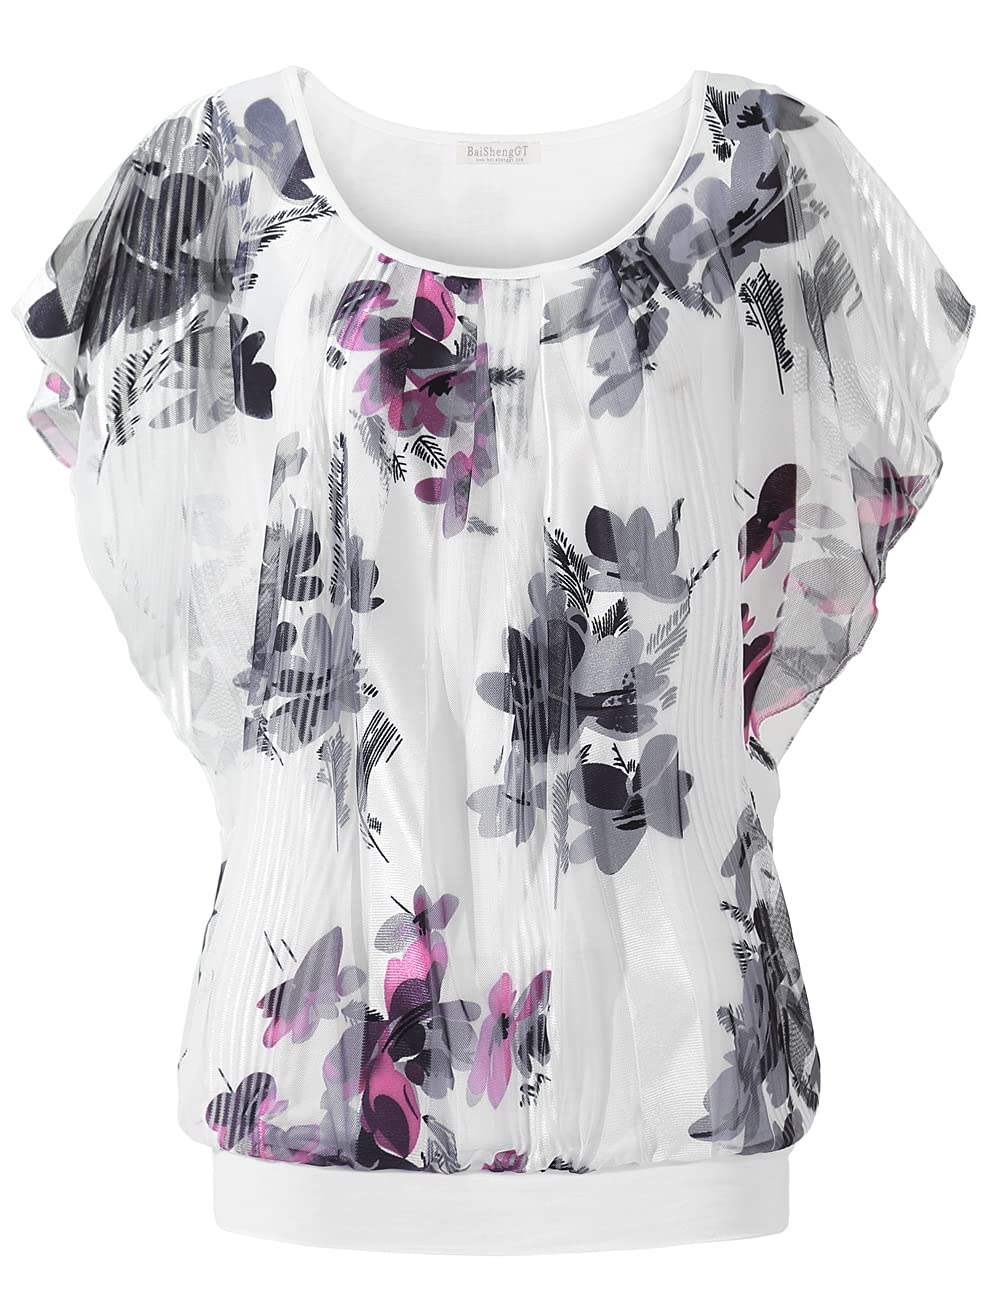 BAISHENGGT White Floral Printed Women's Printed Flouncing Flared Short Sleeve Mesh Blouse Tops